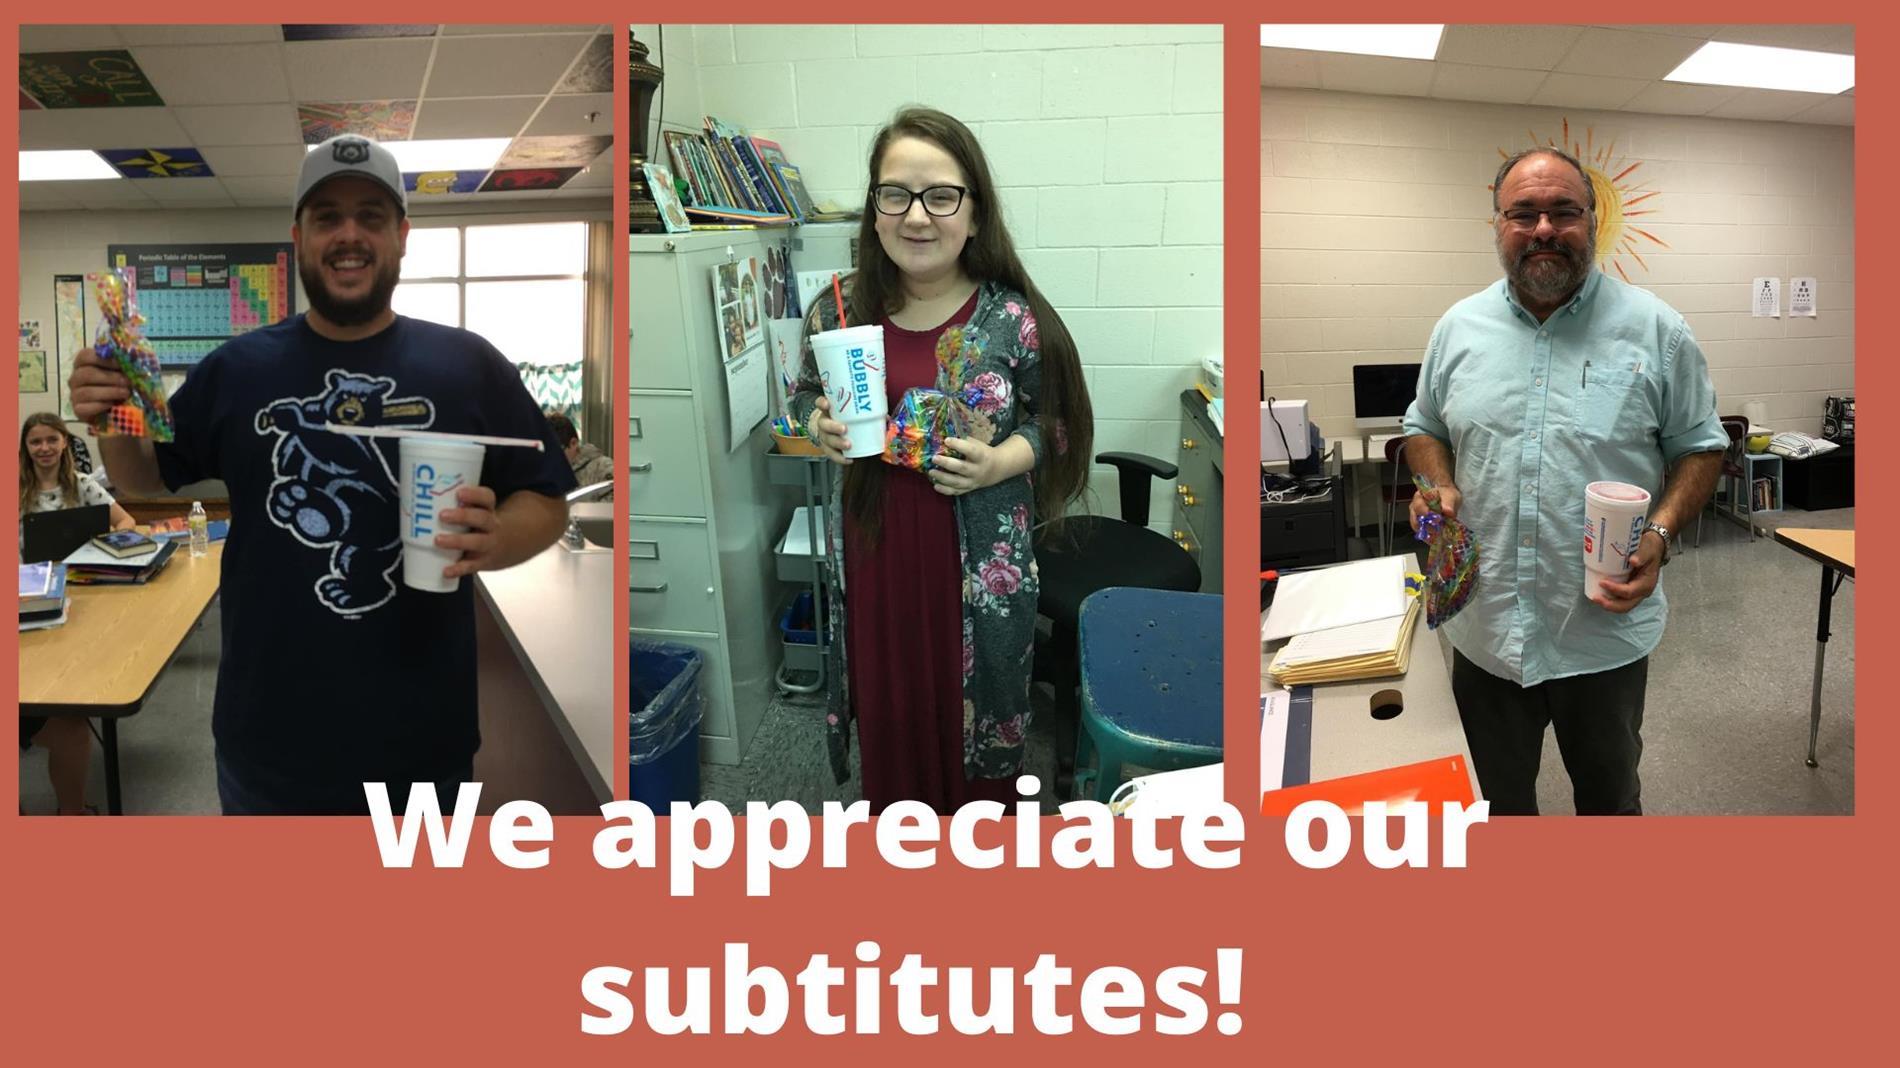 Our substitutes with their Sonic drinks and appreciation treats 